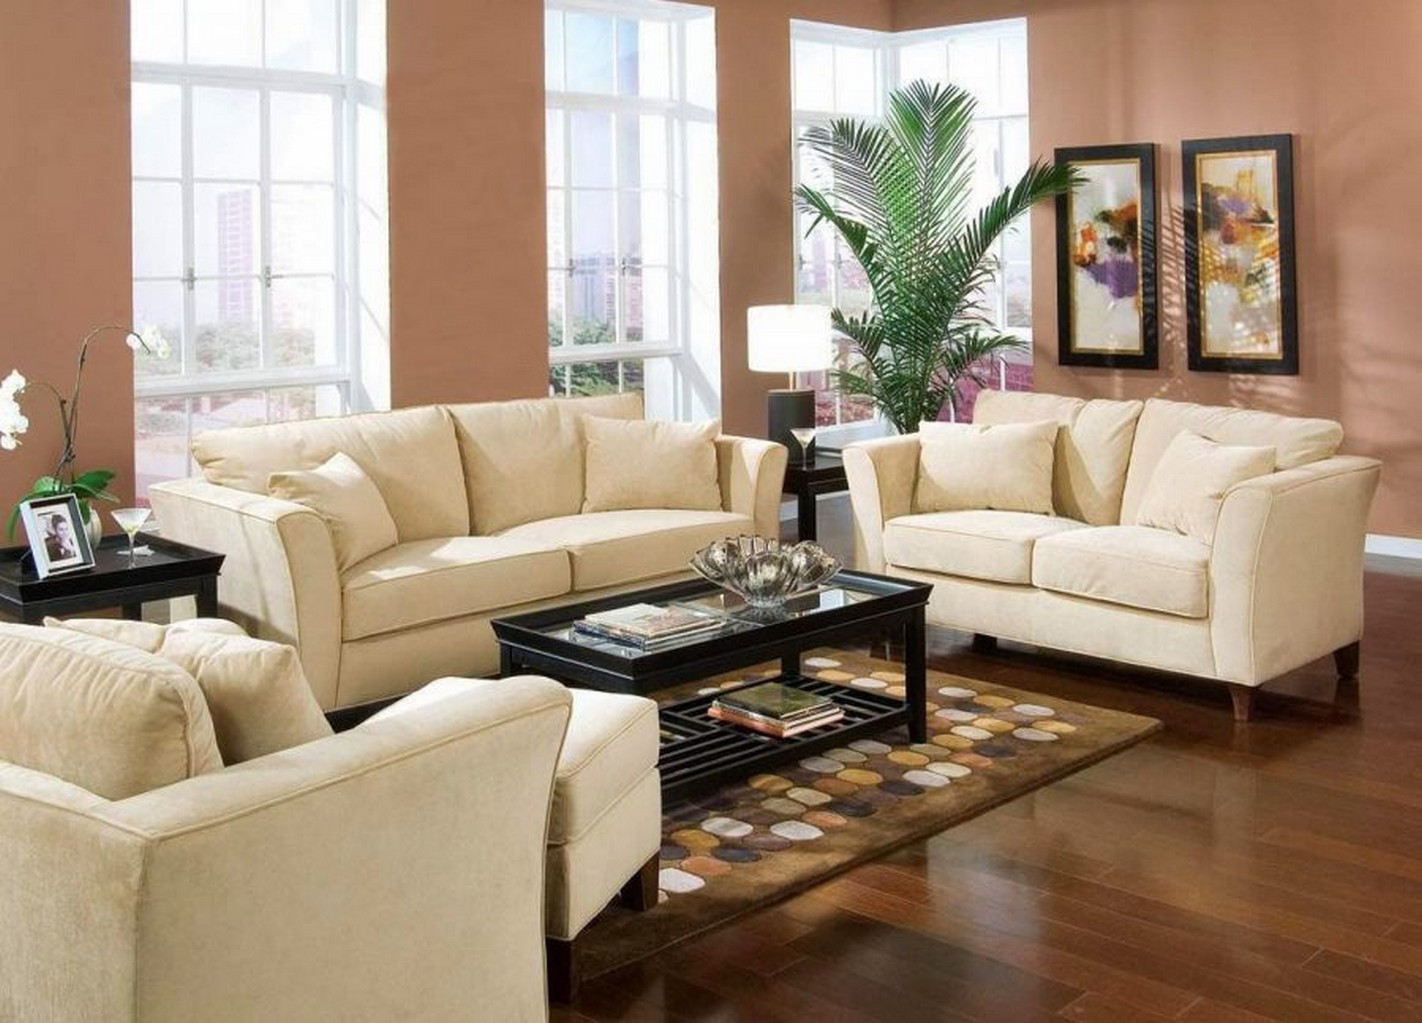 Furniture Ideas For Living Room
 Small Living Room Furniture Ideas FELISH HOME PROJECT